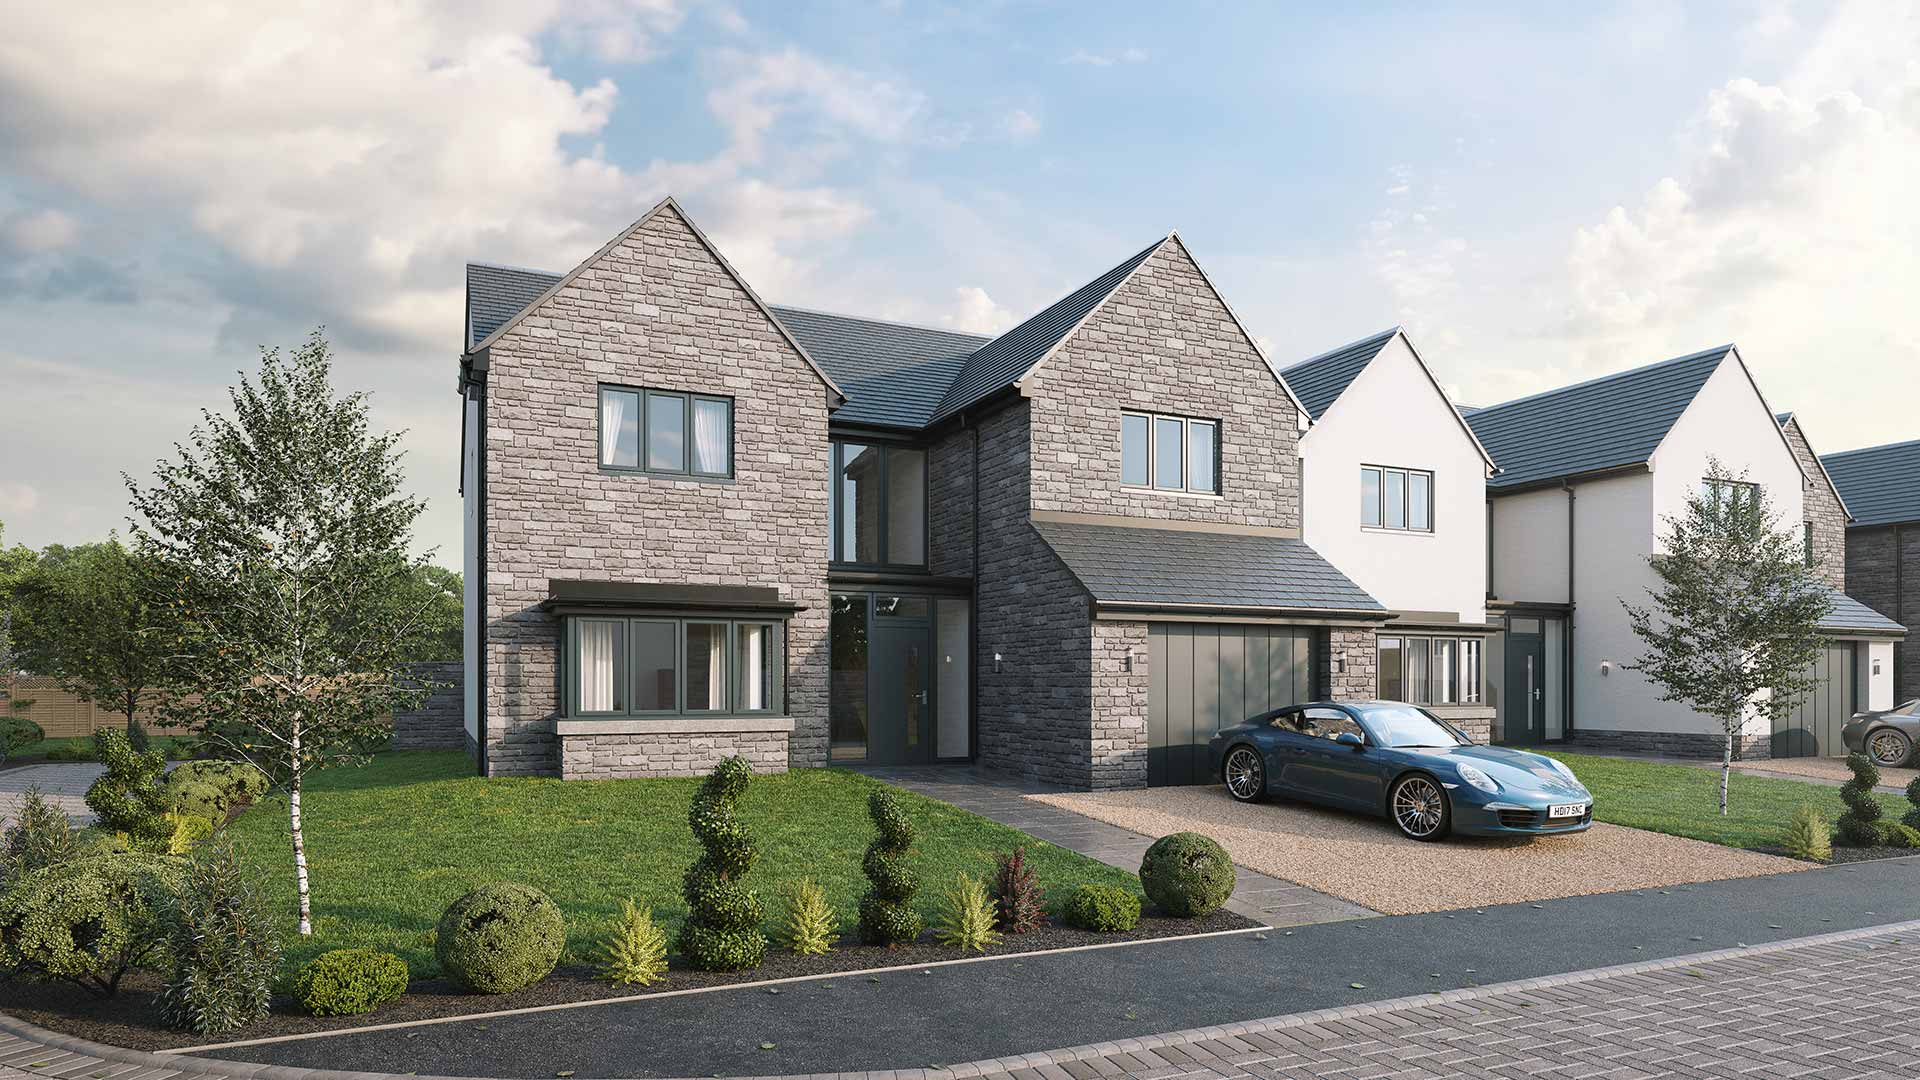 Westacres Luxury Homes - Gower Heights - The Caerphilly